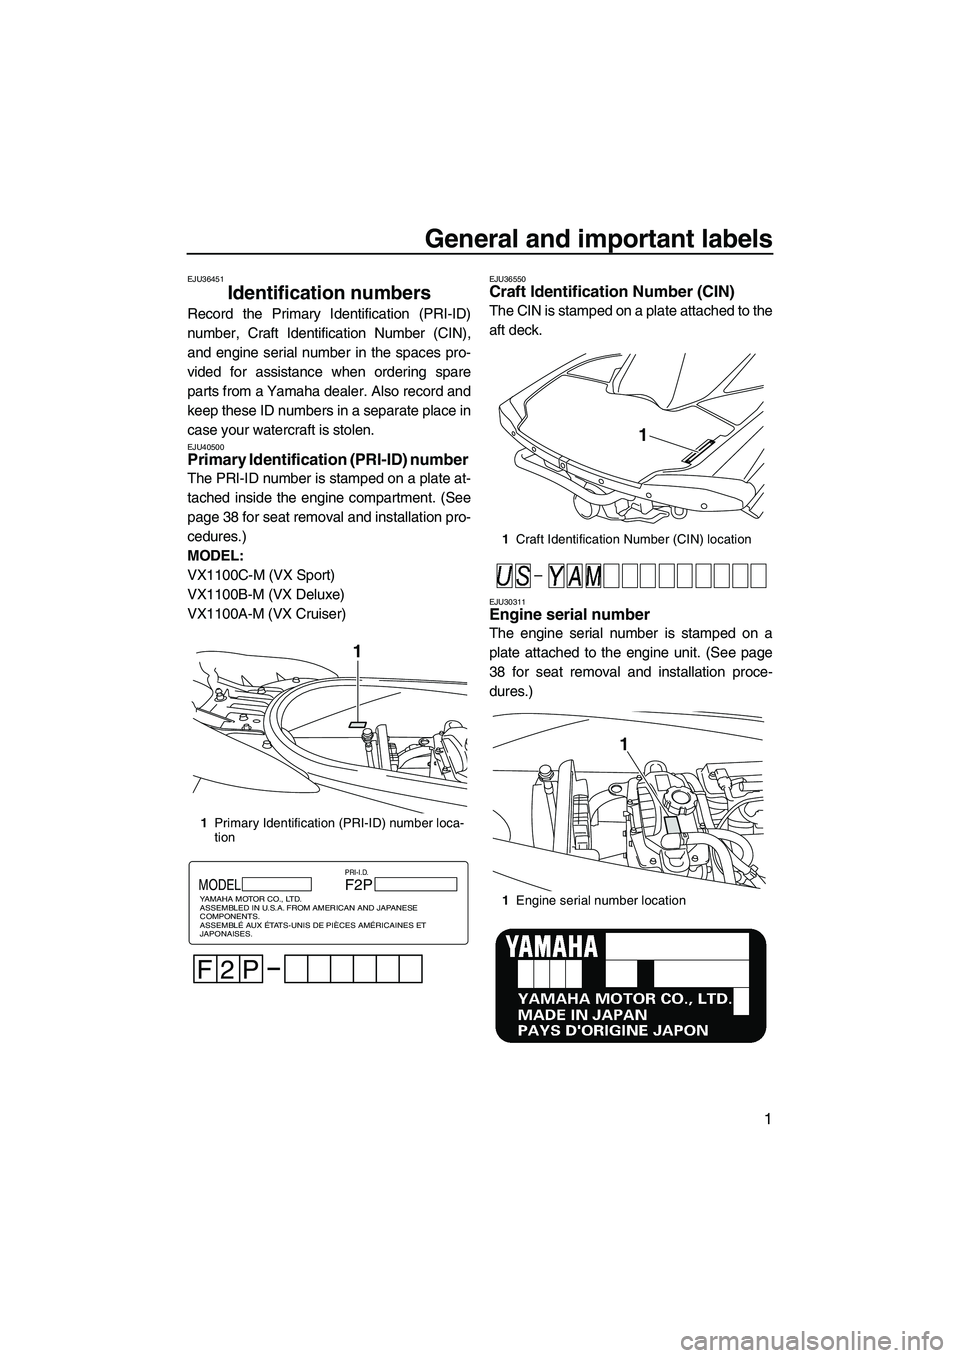 YAMAHA VX DELUXE 2013  Owners Manual General and important labels
1
EJU36451
Identification numbers 
Record the Primary Identification (PRI-ID)
number, Craft Identification Number (CIN),
and engine serial number in the spaces pro-
vided 